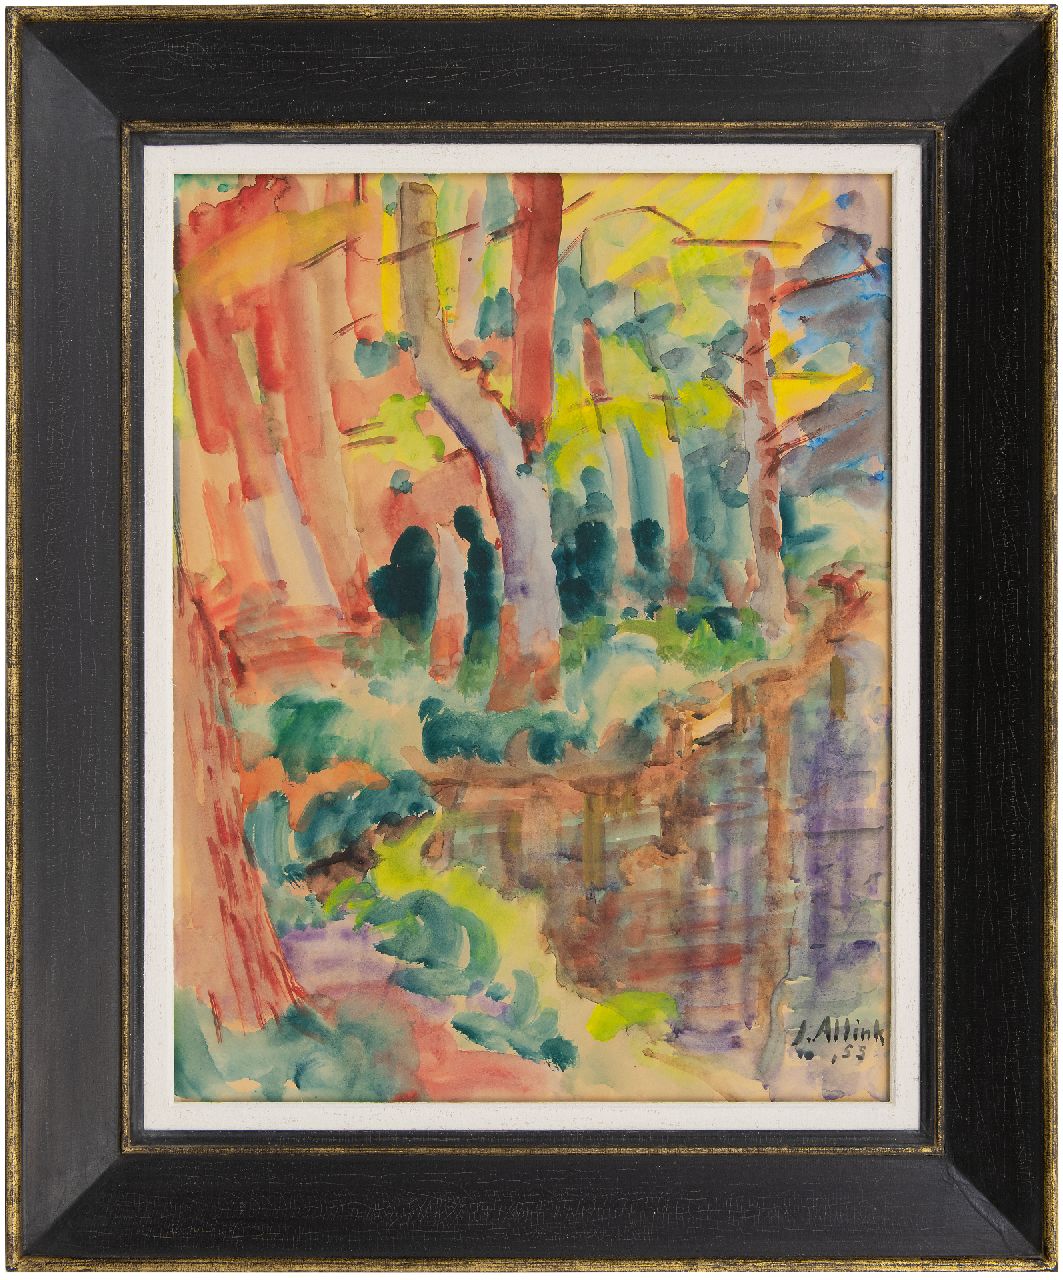 Altink J.  | Jan Altink, Forest with a pond, watercolour on paper 61.7 x 46.7 cm, signed l.r. and dated '55